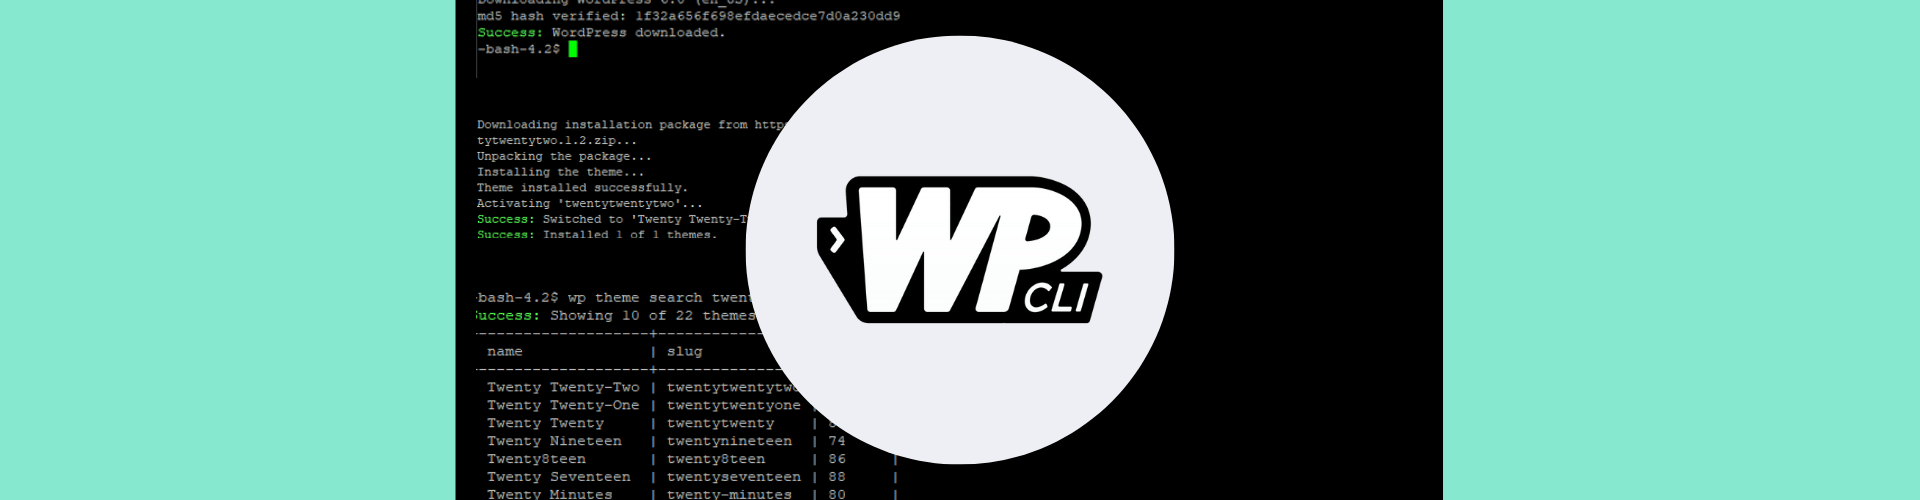 WP-CLI getting started guide